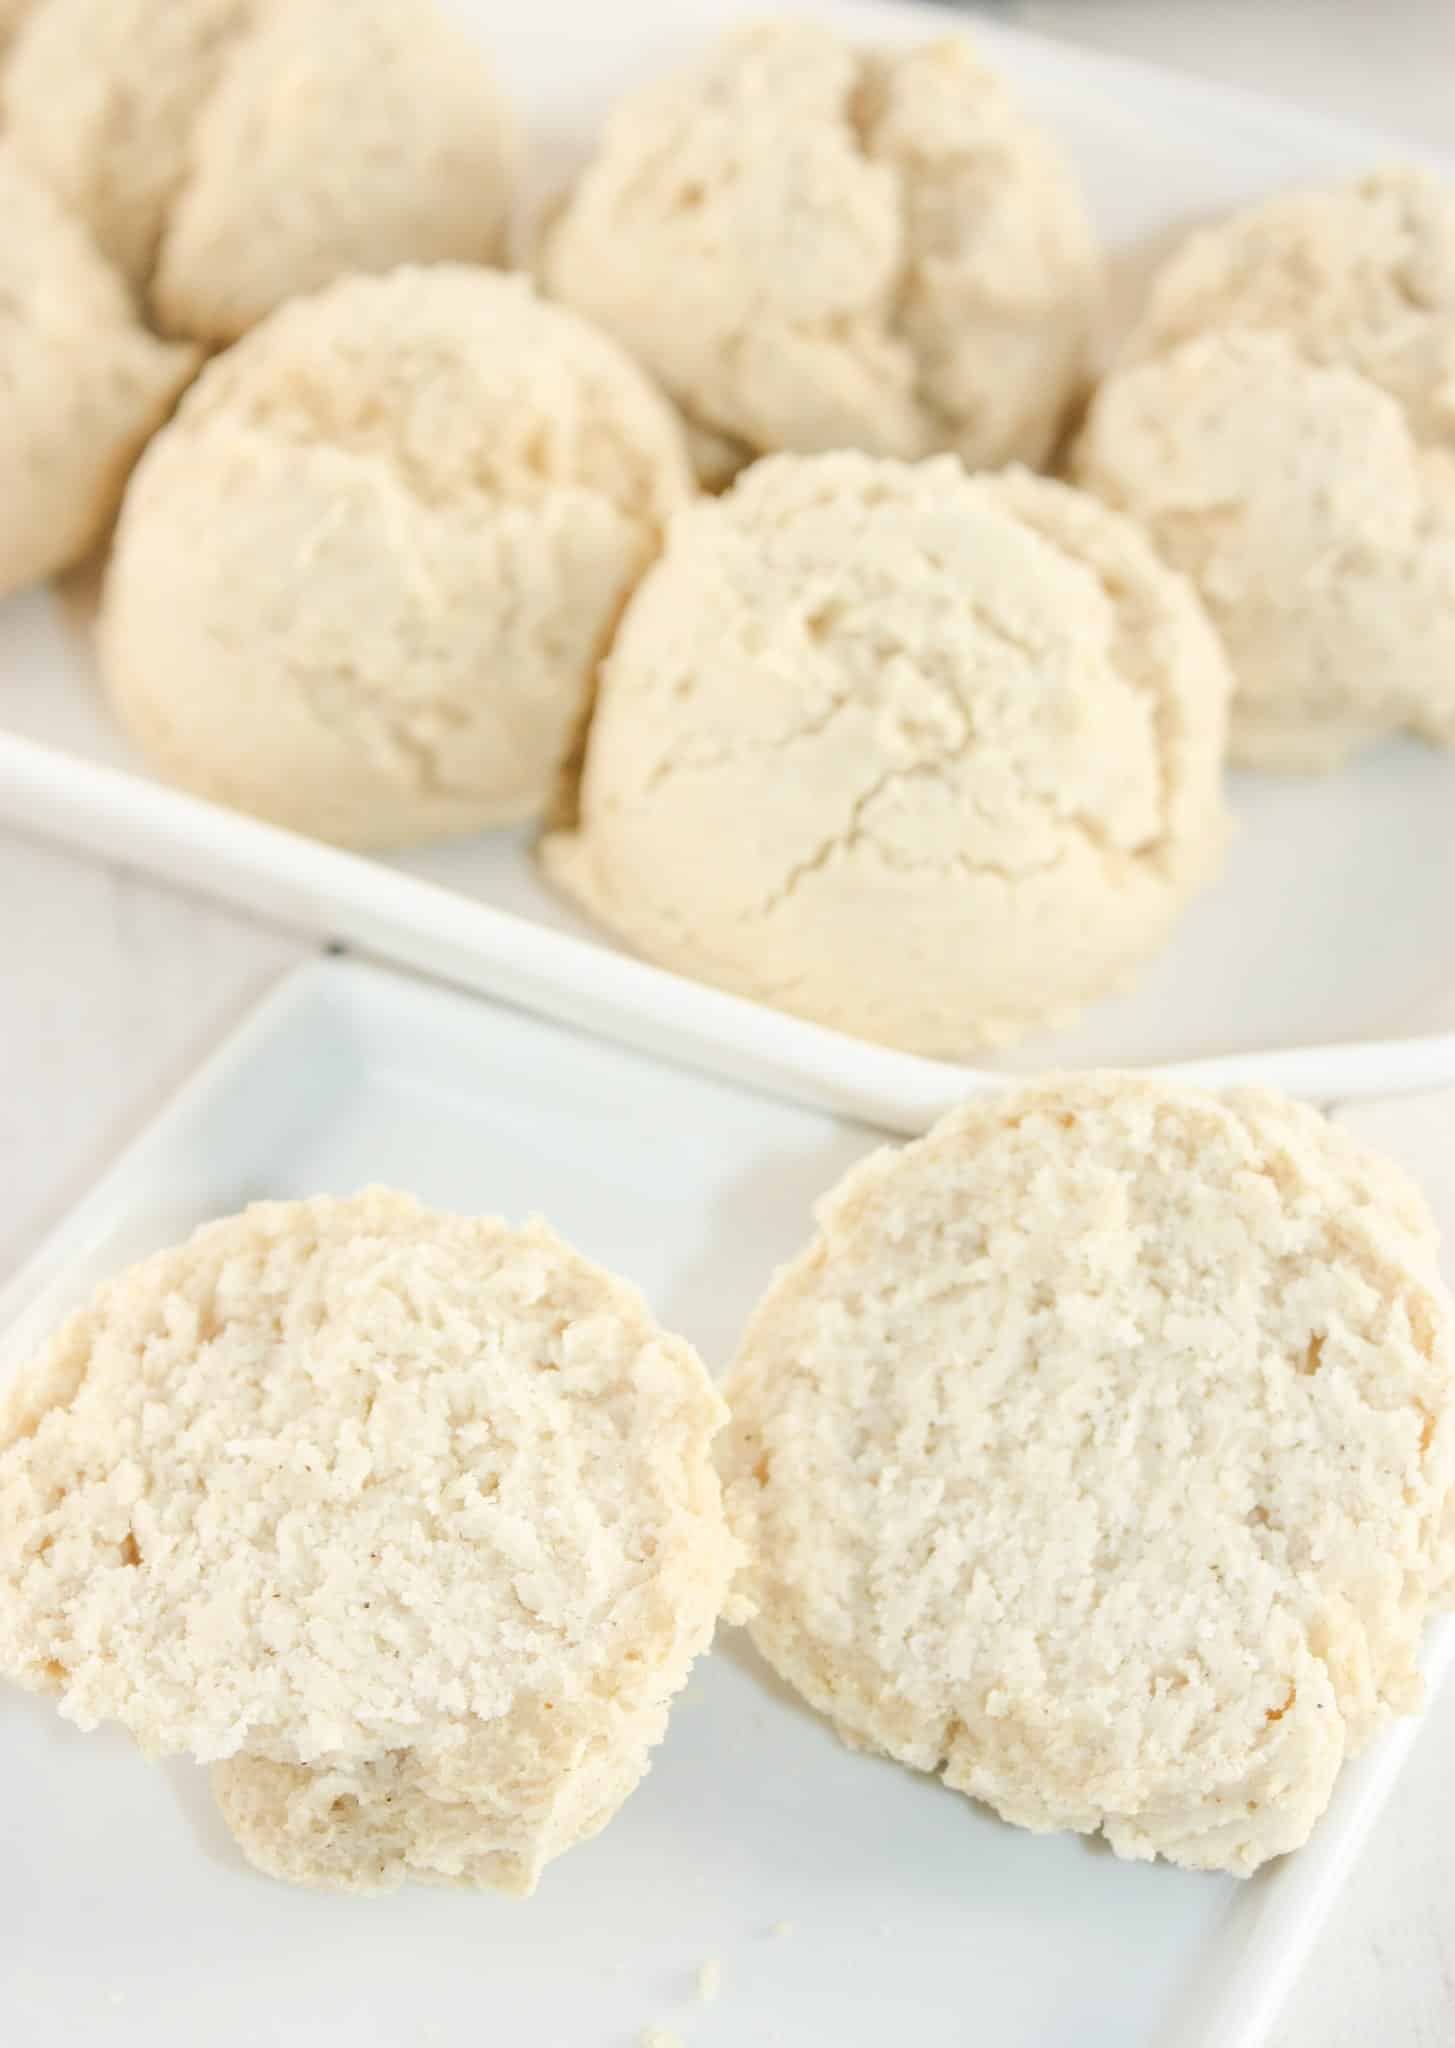 These Gluten Free Biscuits are a nice, fluffy bread recipe that is easy and quick to make.